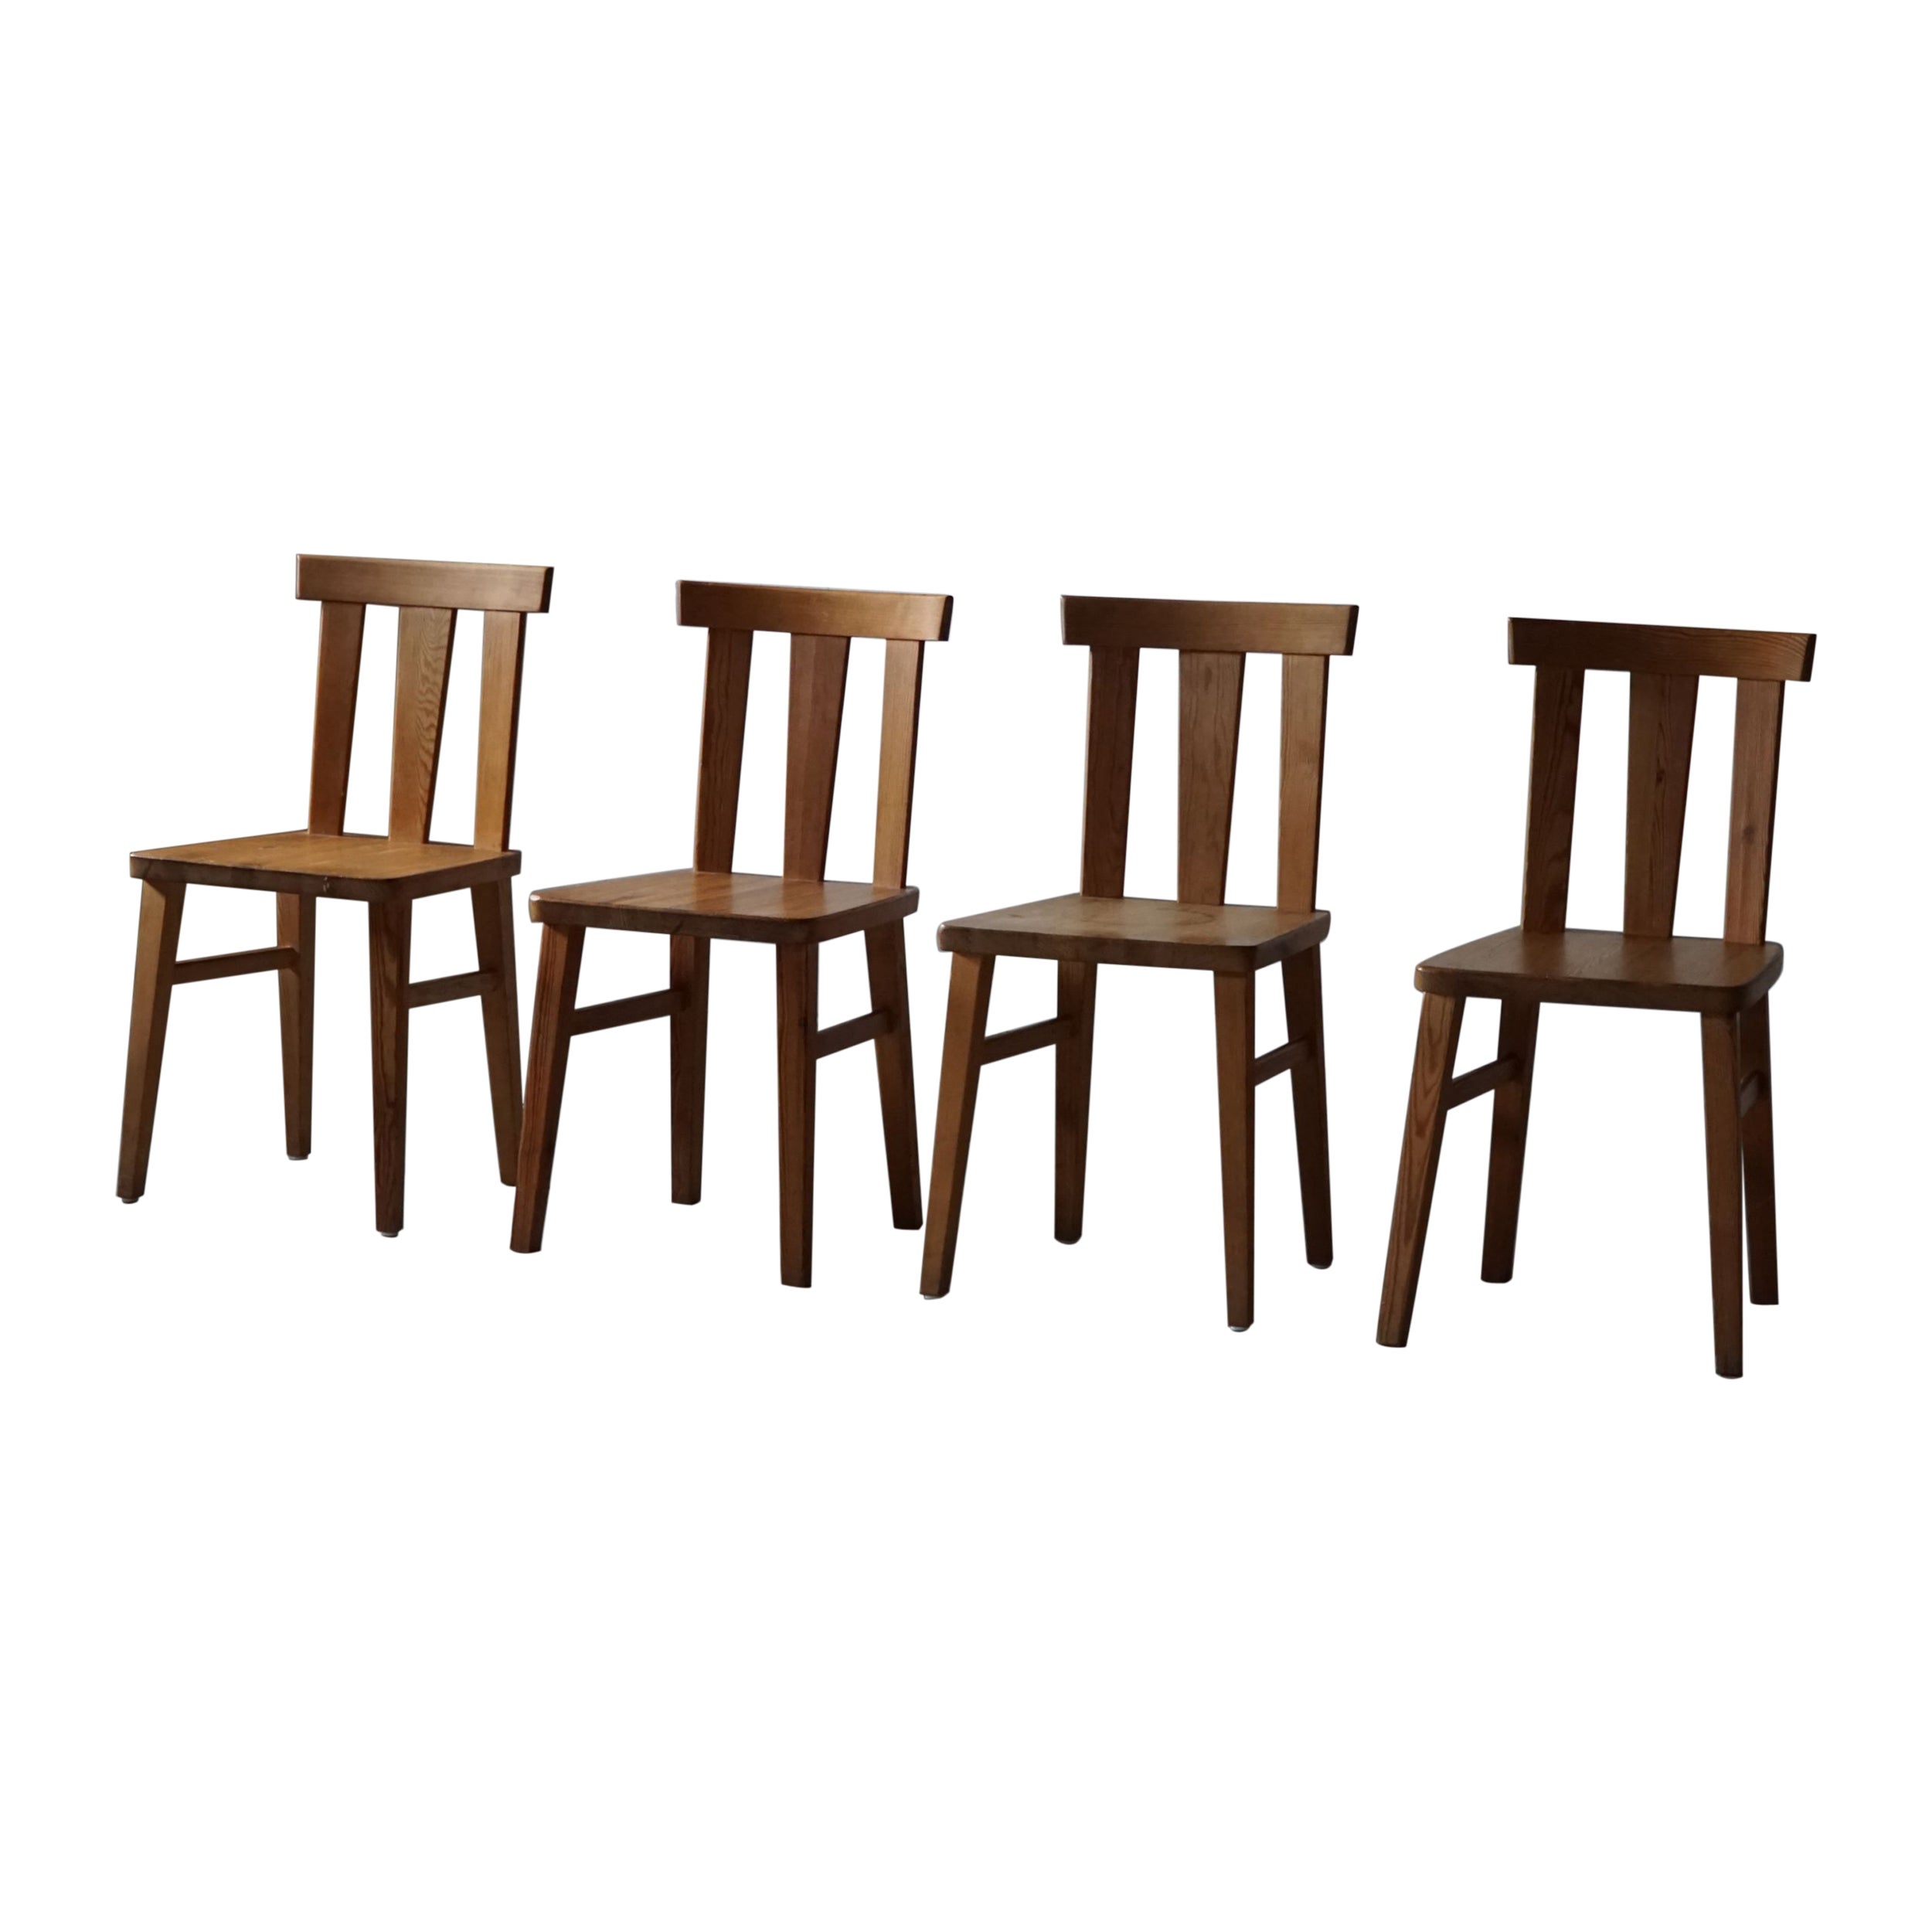 Set of 4 Swedish Modern Chairs in Solid Pine, Axel Einar Hjorth Style, 1930s For Sale